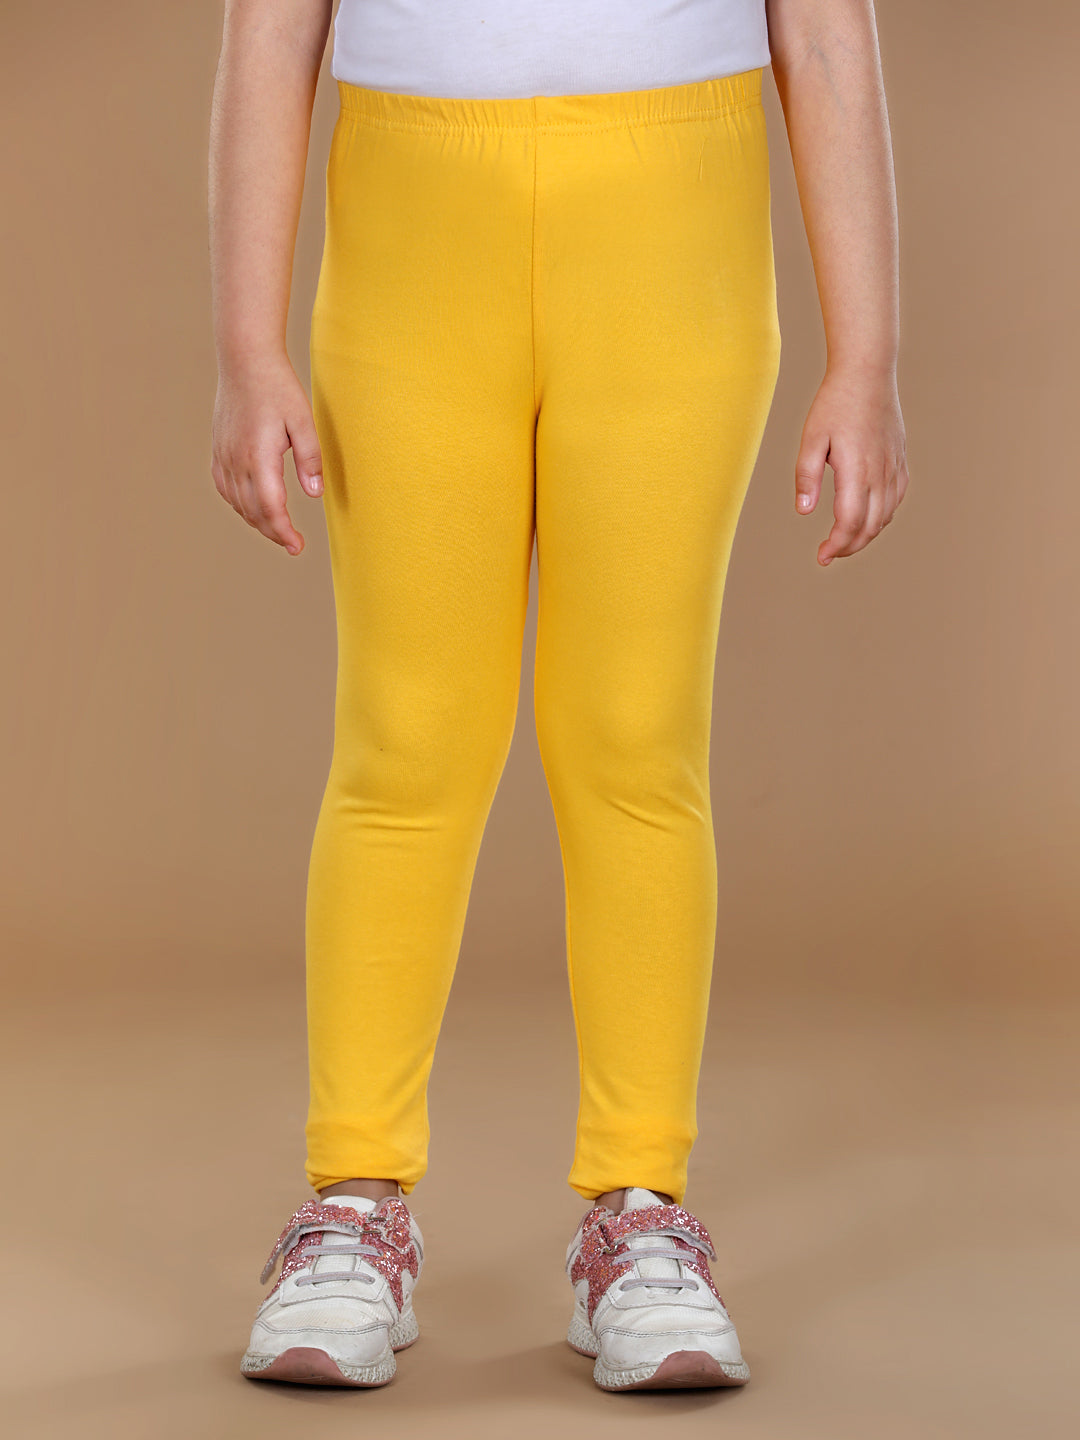 PRINxy Kids Full Length Pants,Toddler Baby Girls Candy Color Solid Color  Leggings Casual Kids Tight Pants,Yellow,130 - Walmart.com